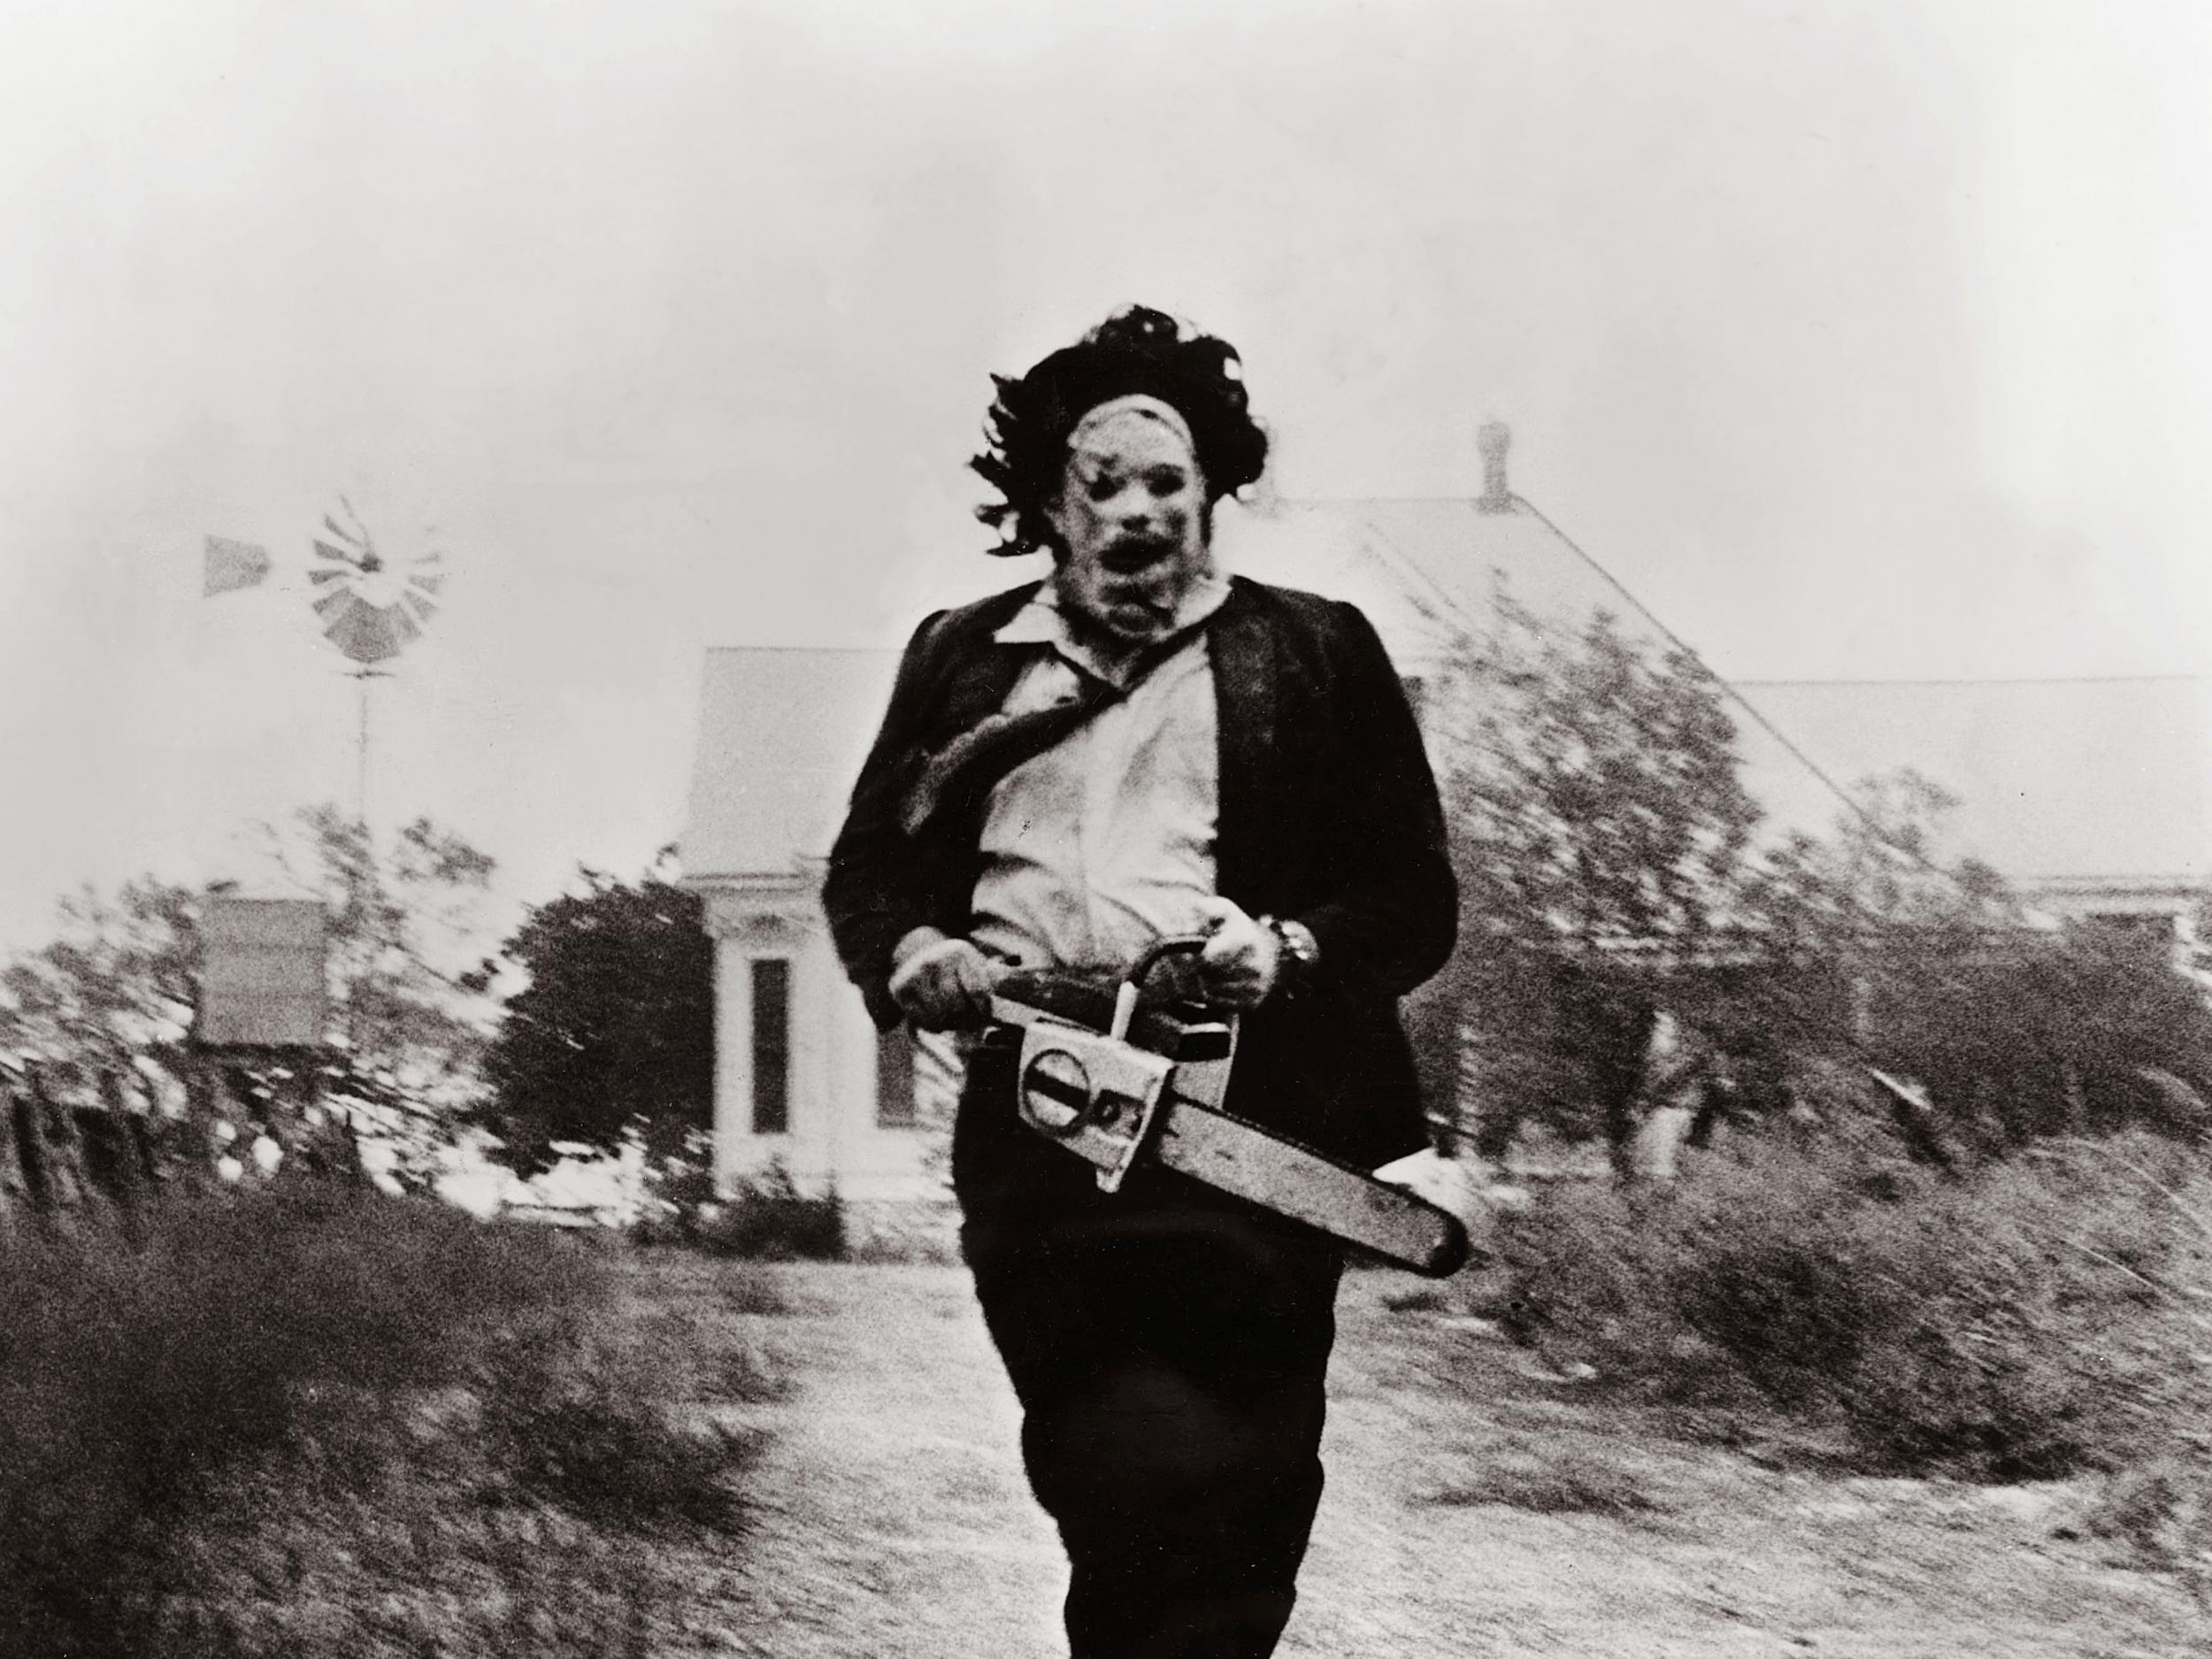 Leatherface (played by Gunnar Hansen) hunts his prey with a hammer, a meat hook and a chain saw